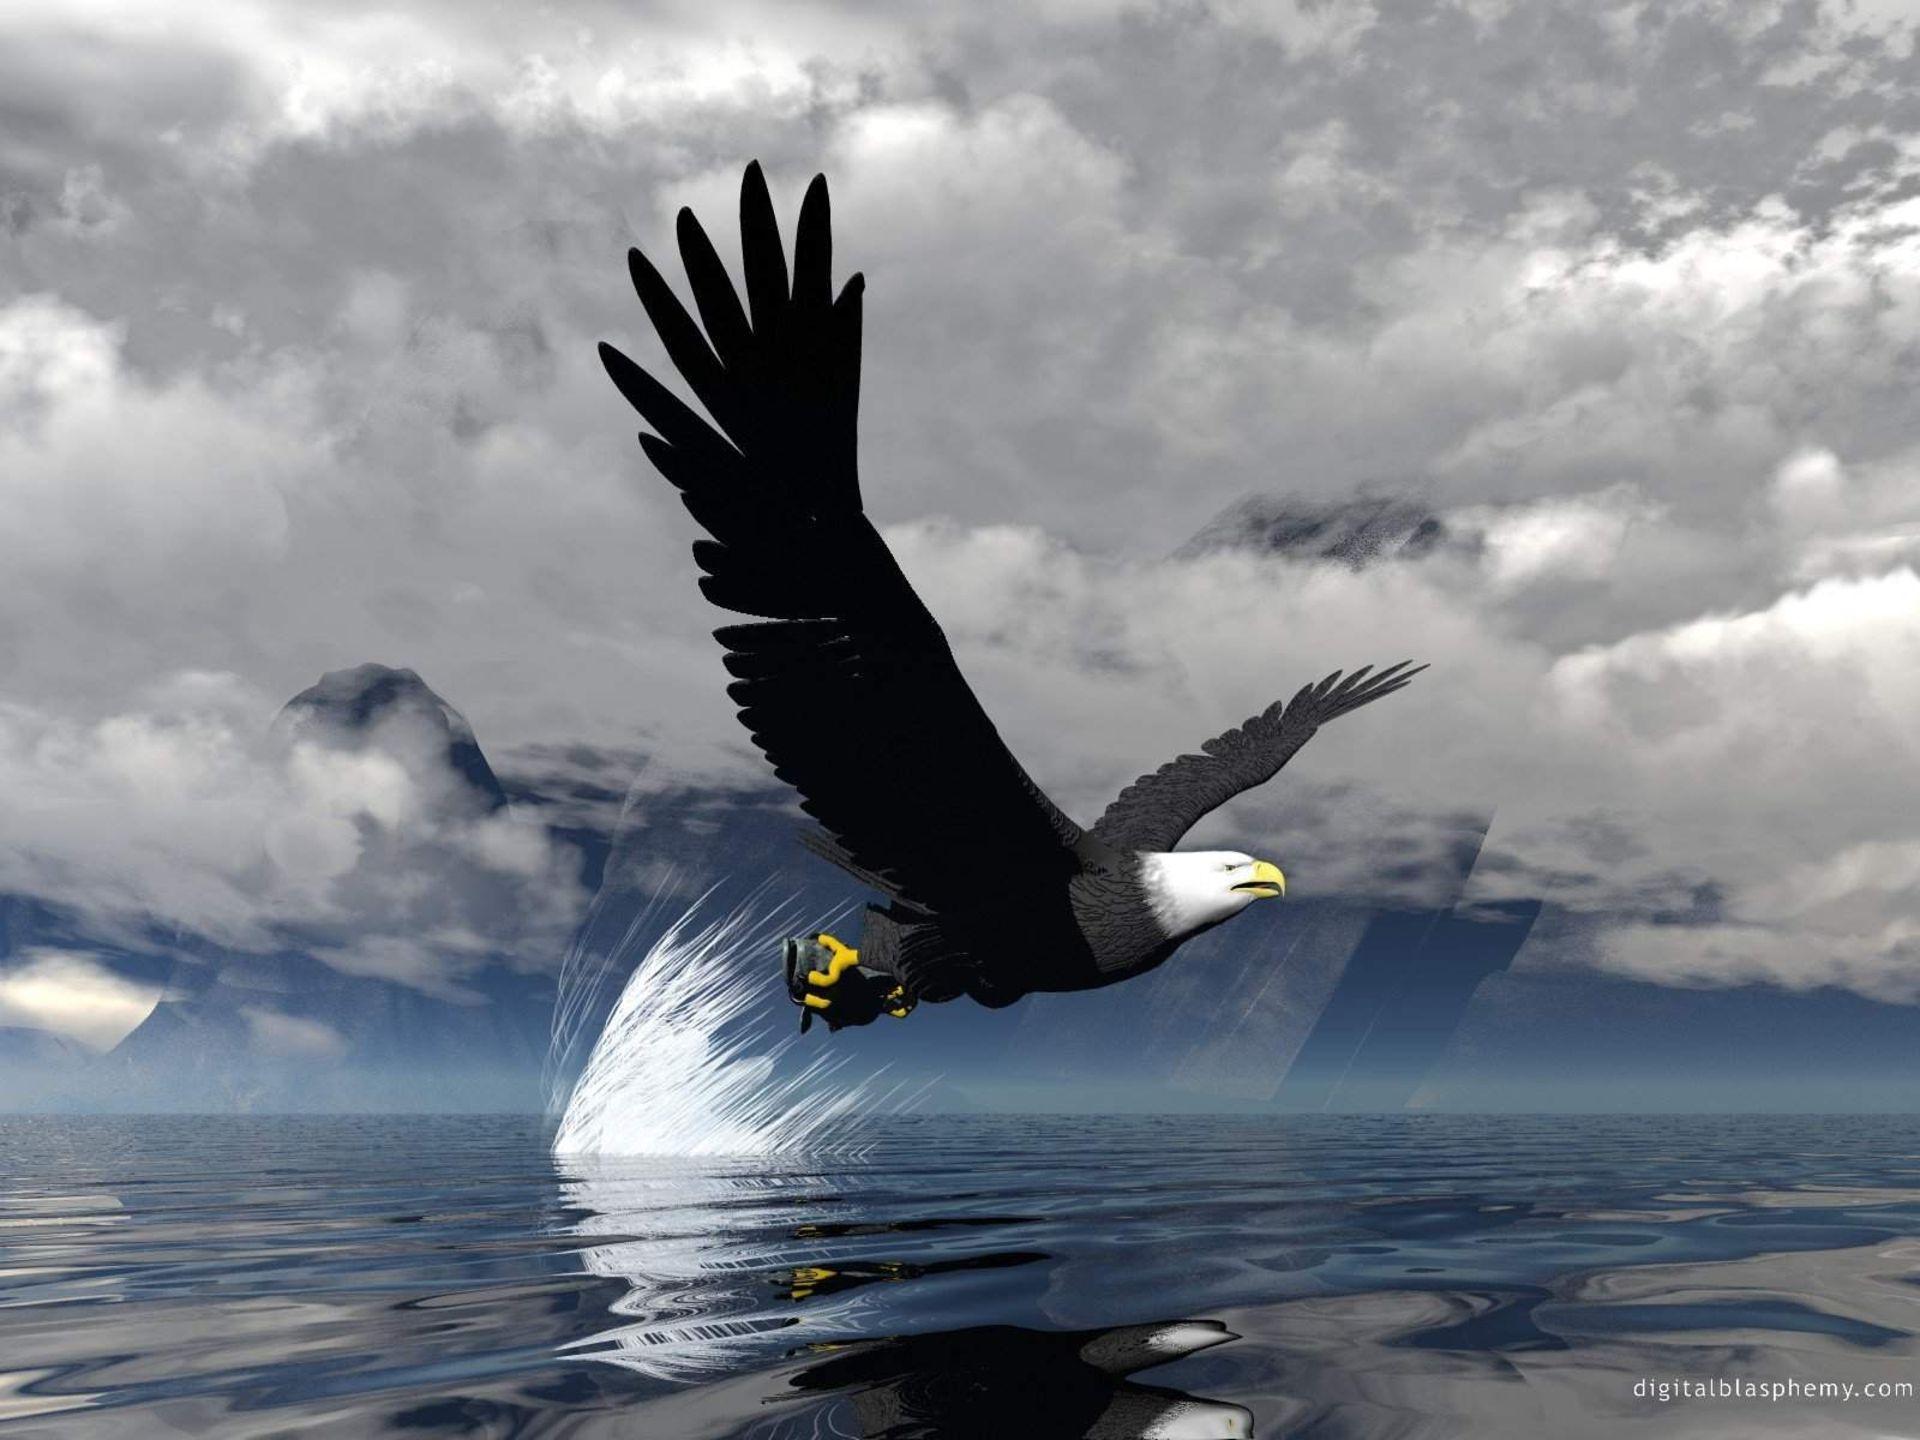 Animal 3D Eagle Flying On Water Wallpaper HD Picture Free